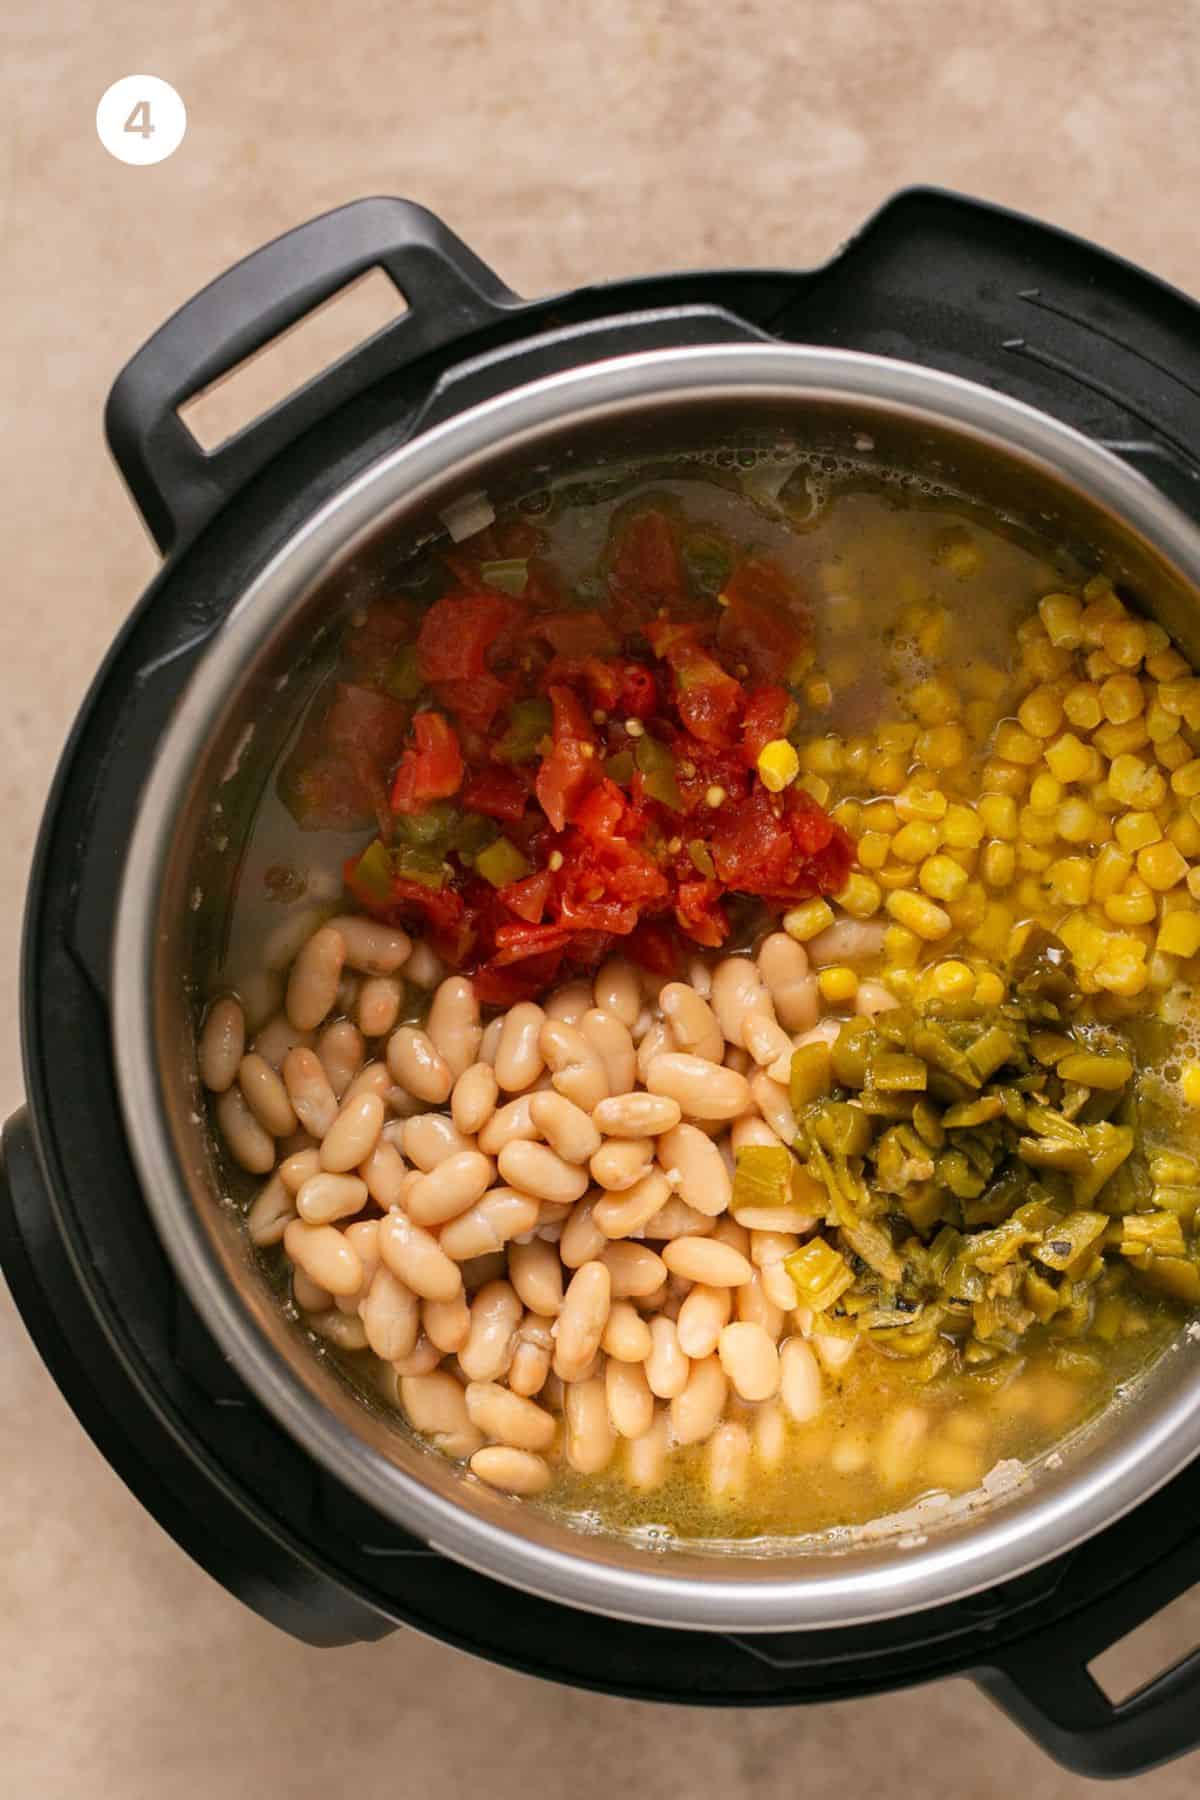 Chilies, tomatoes, corn, beans and broth added to an Instand Pot.